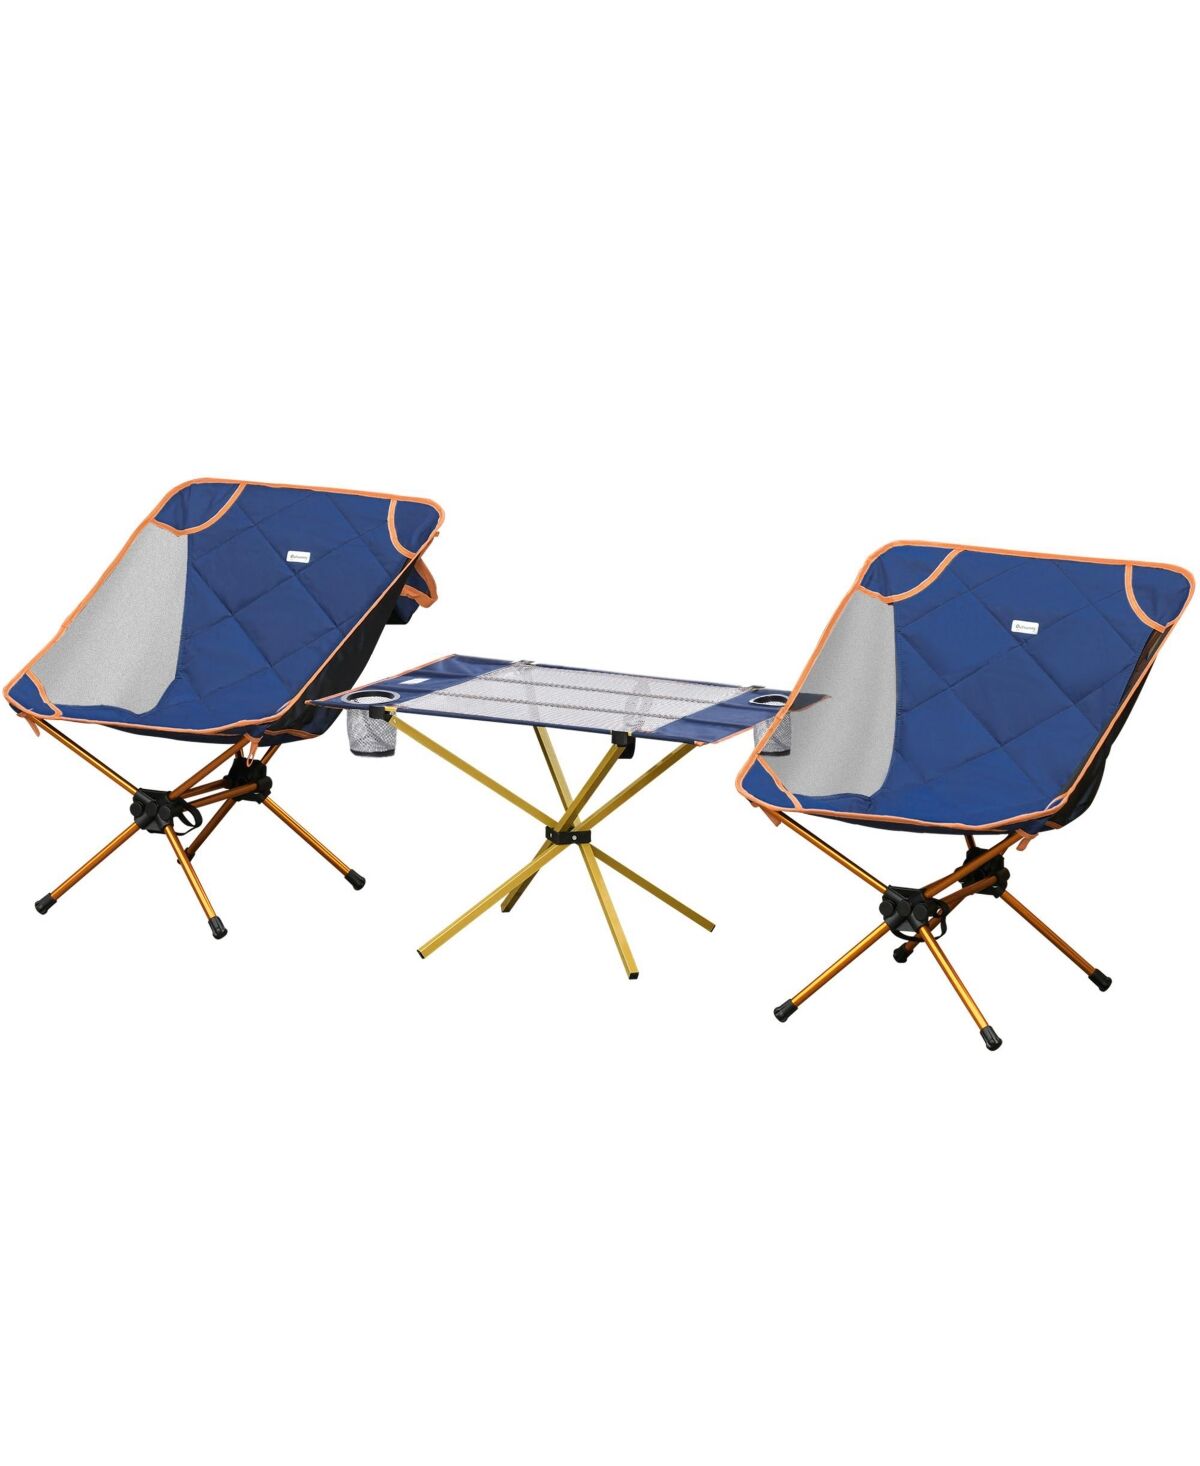 Outsunny 3 Piece Padded Camping Chair Set, Folding Chairs with Portable Table, Cup Holders, Carry Bag for Travel, Camping, Fishing and Beach - Navy bl